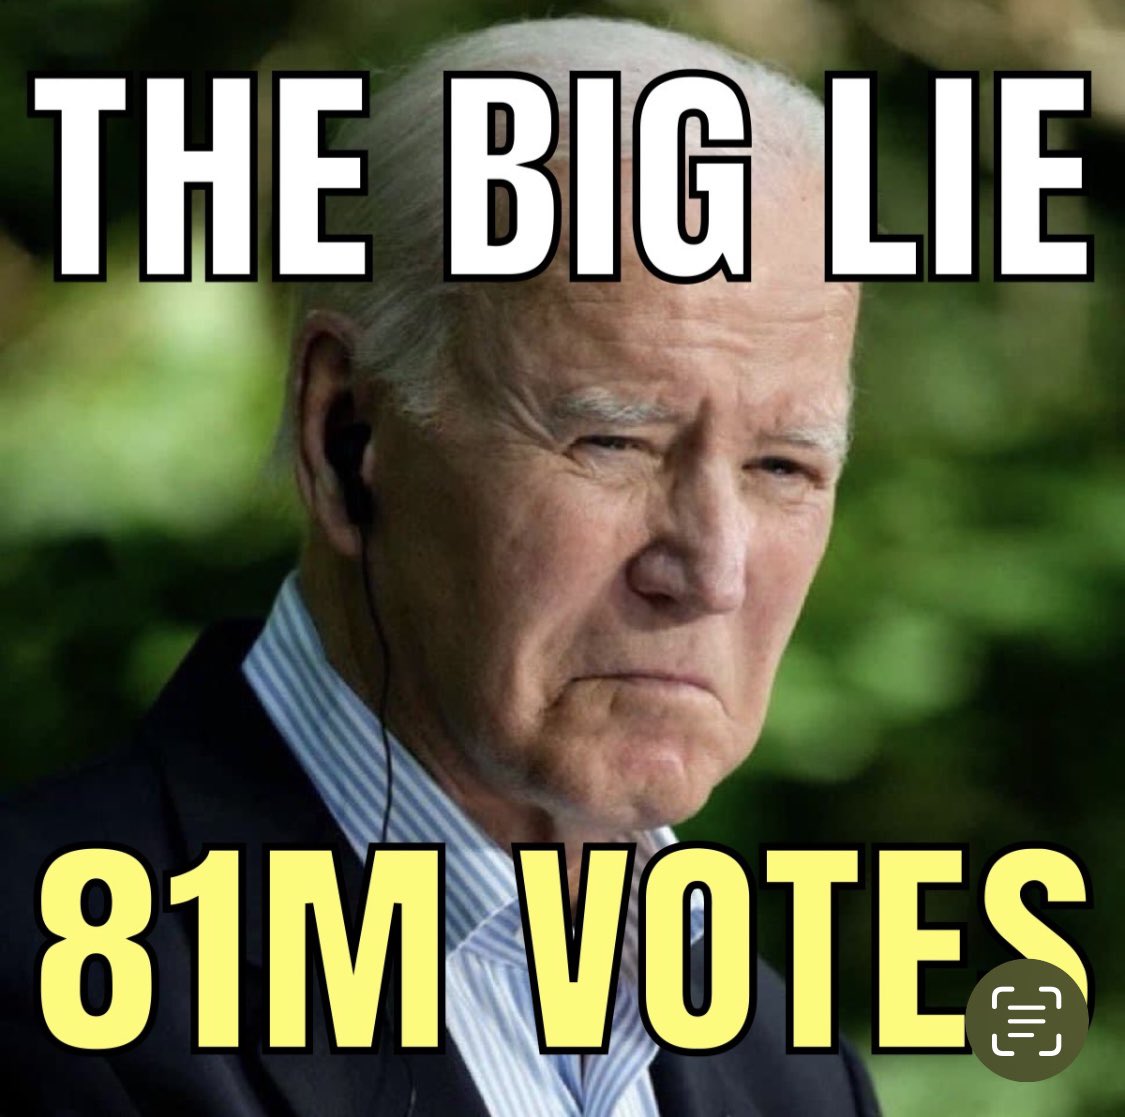 The BIG LIE: Biden's engineered 81M votes. These 81M voters are NOWHERE to be found. Trump = 100,000 people in a blue state. Biden = No crowds, no enthusiasm. Just the propaganda from the media telling you NOT to believe what you see with your own eyes!